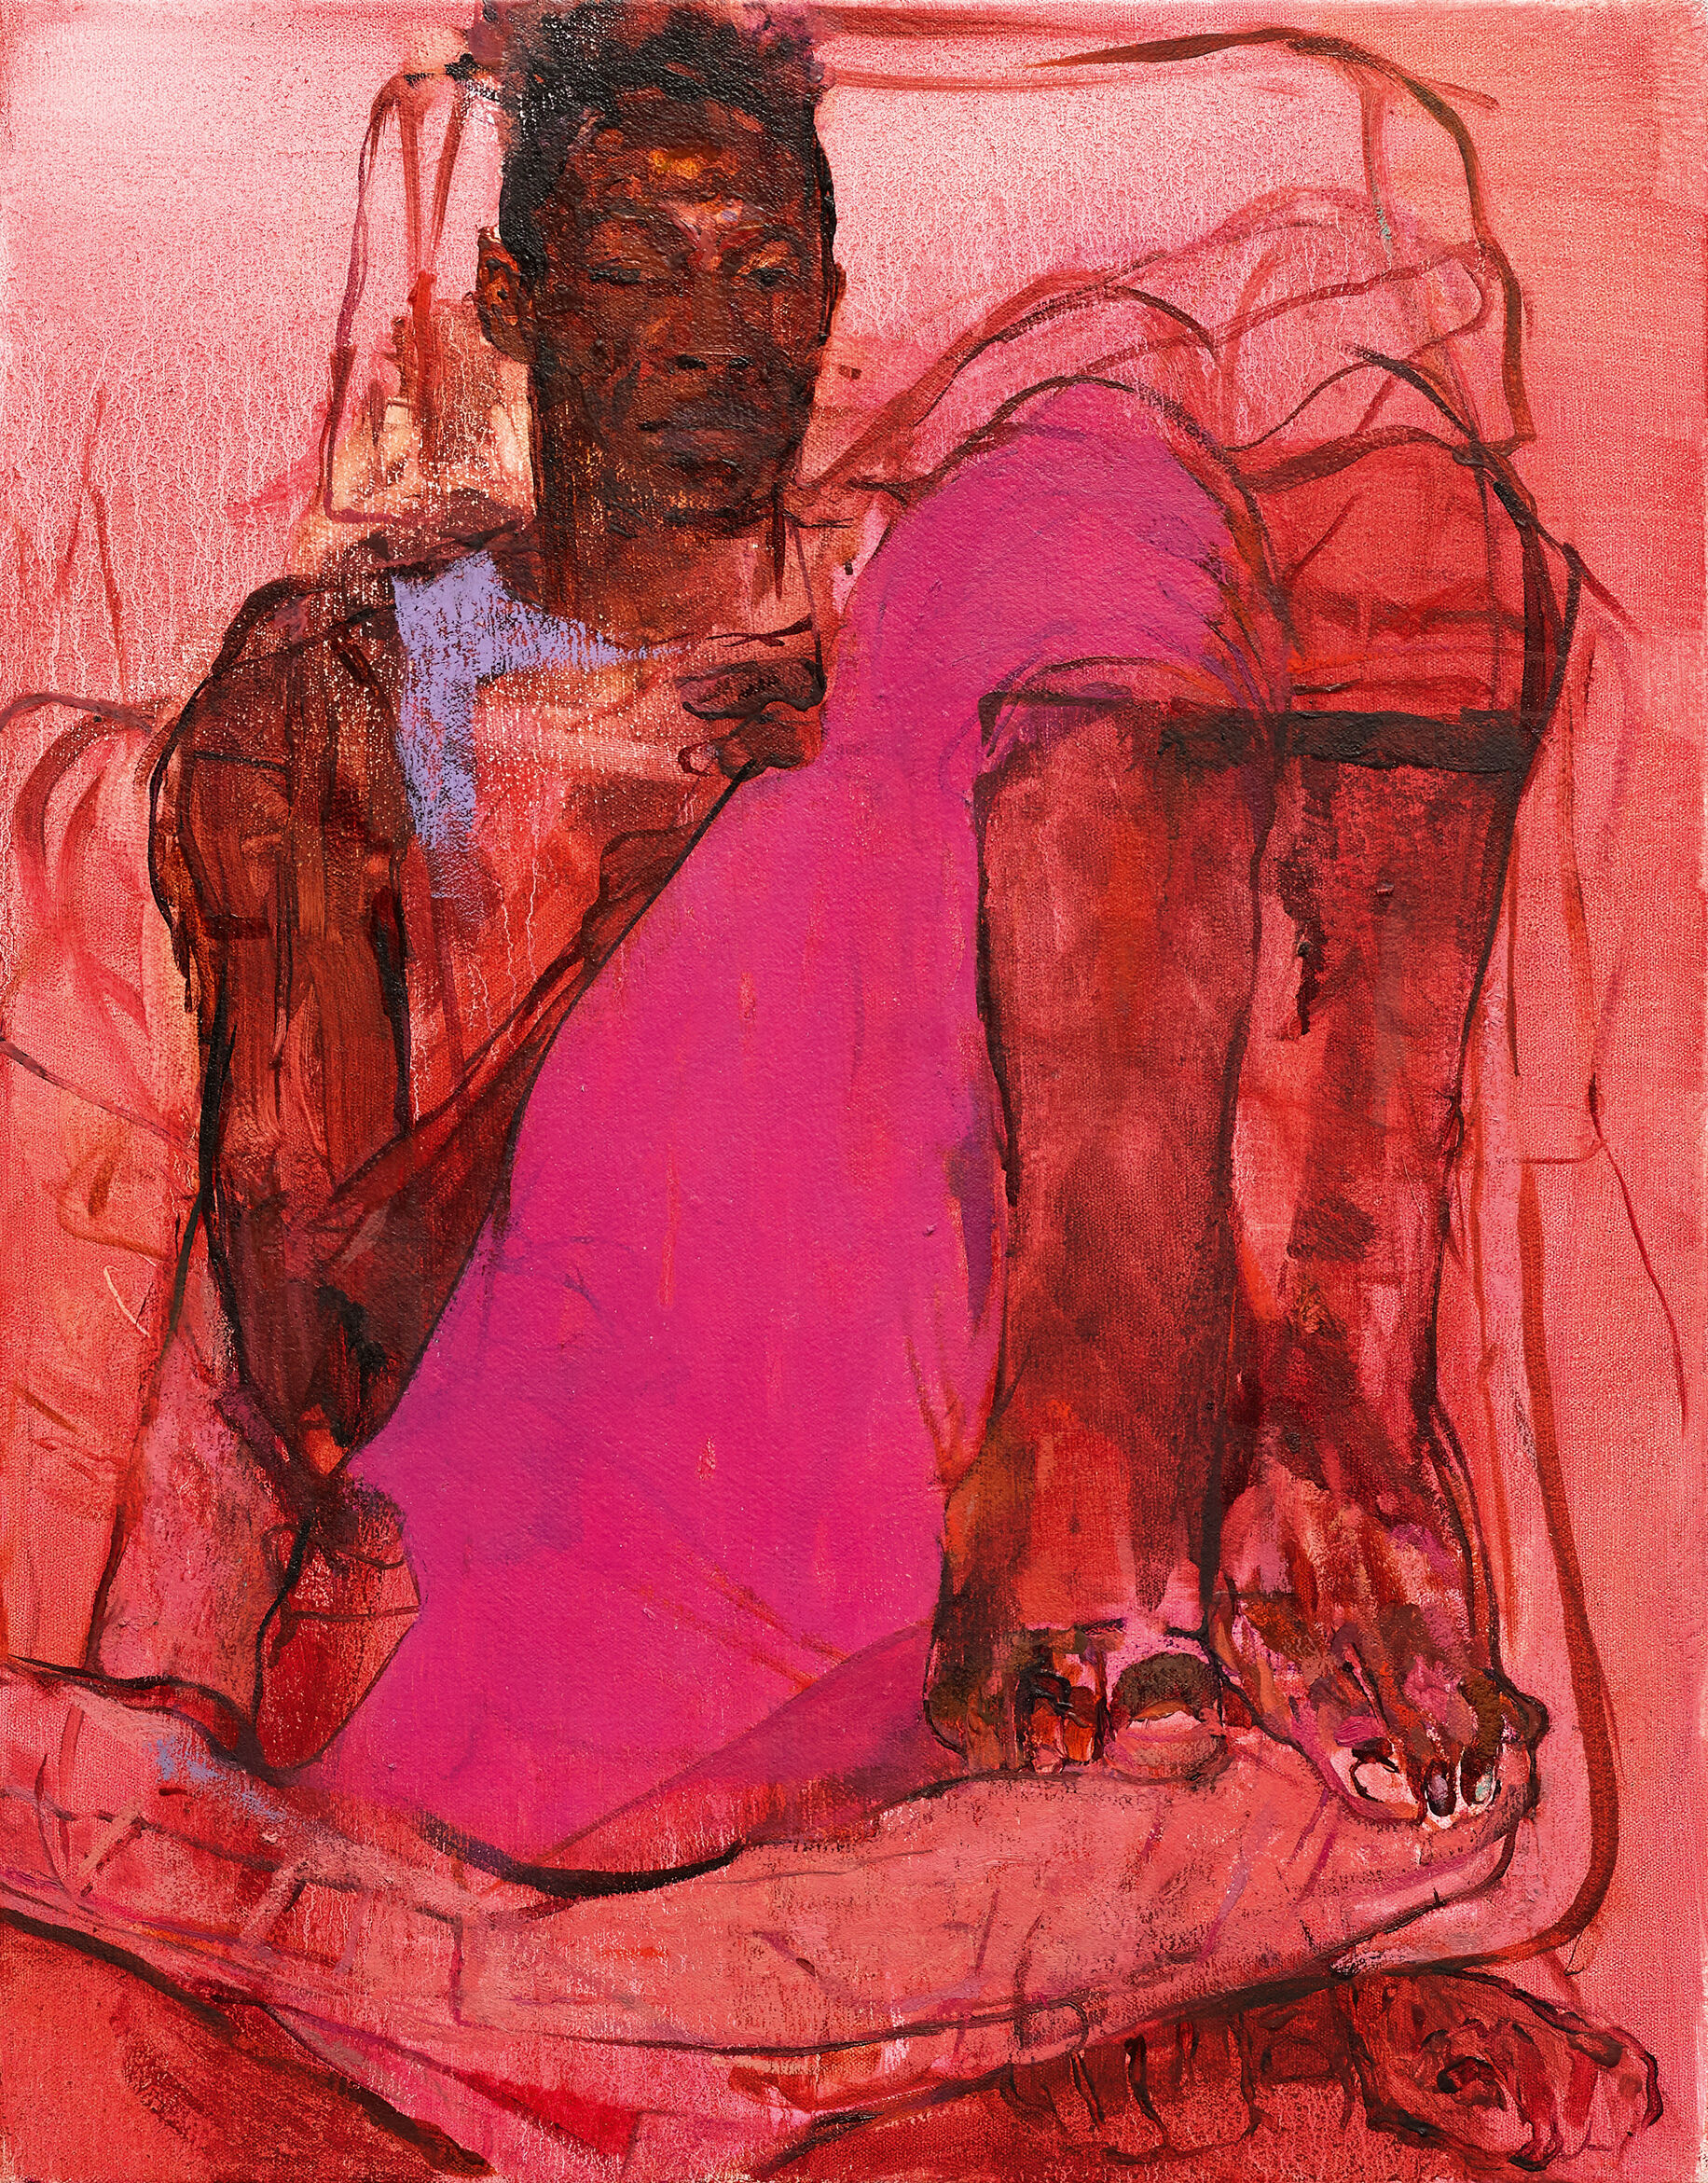 A figure sits back, with knees drawn close in, and meets the viewer's gaze.